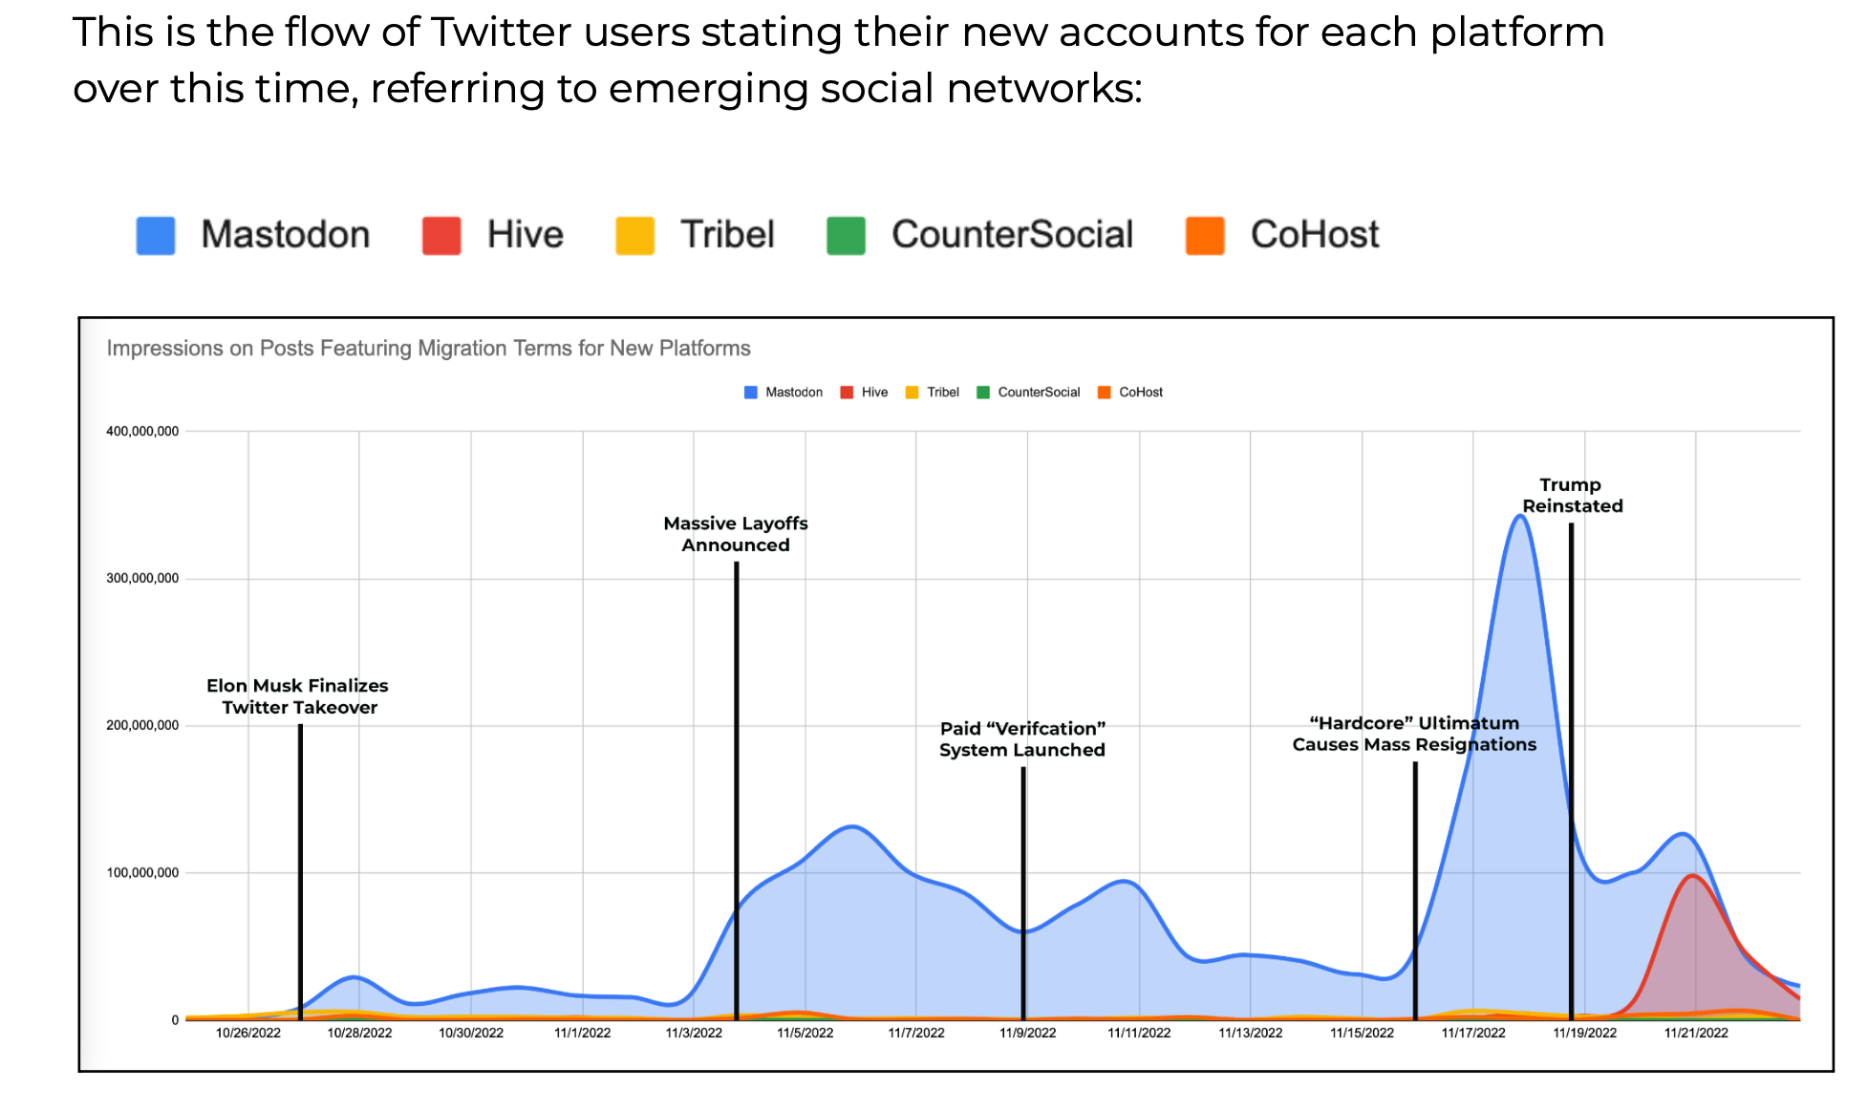 The flow of Twitter Users Stating New Accounts on Emerging Social Networks